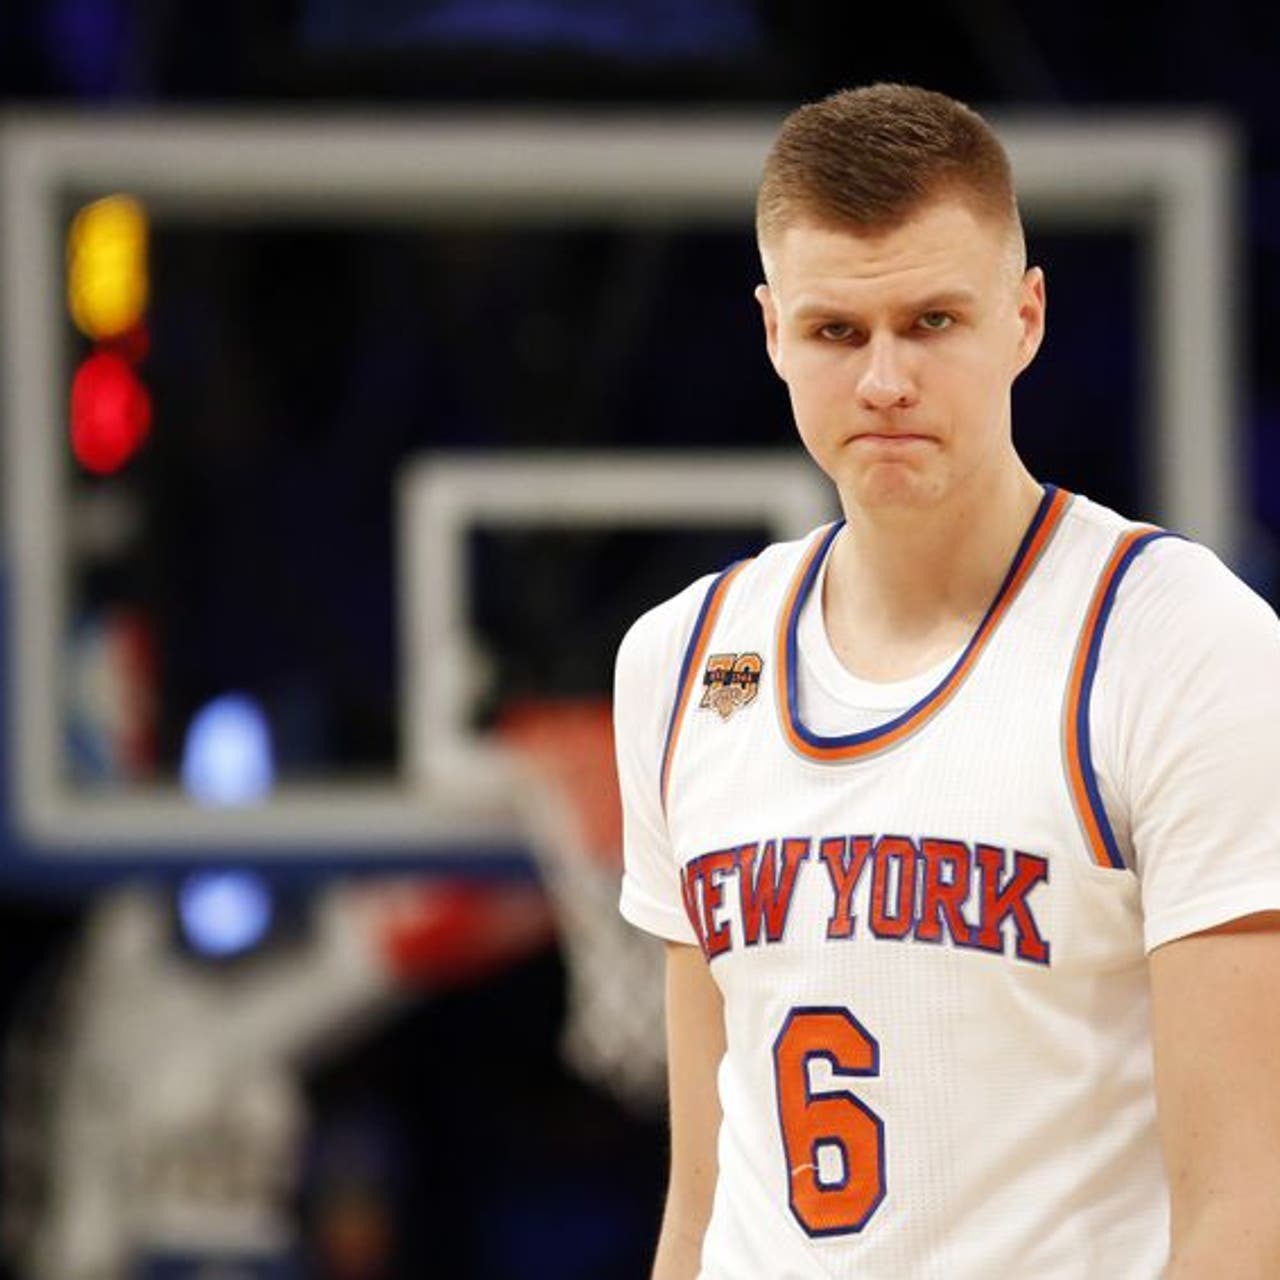 Knicks select Kristaps Porzingis as fourth overall pick in NBA